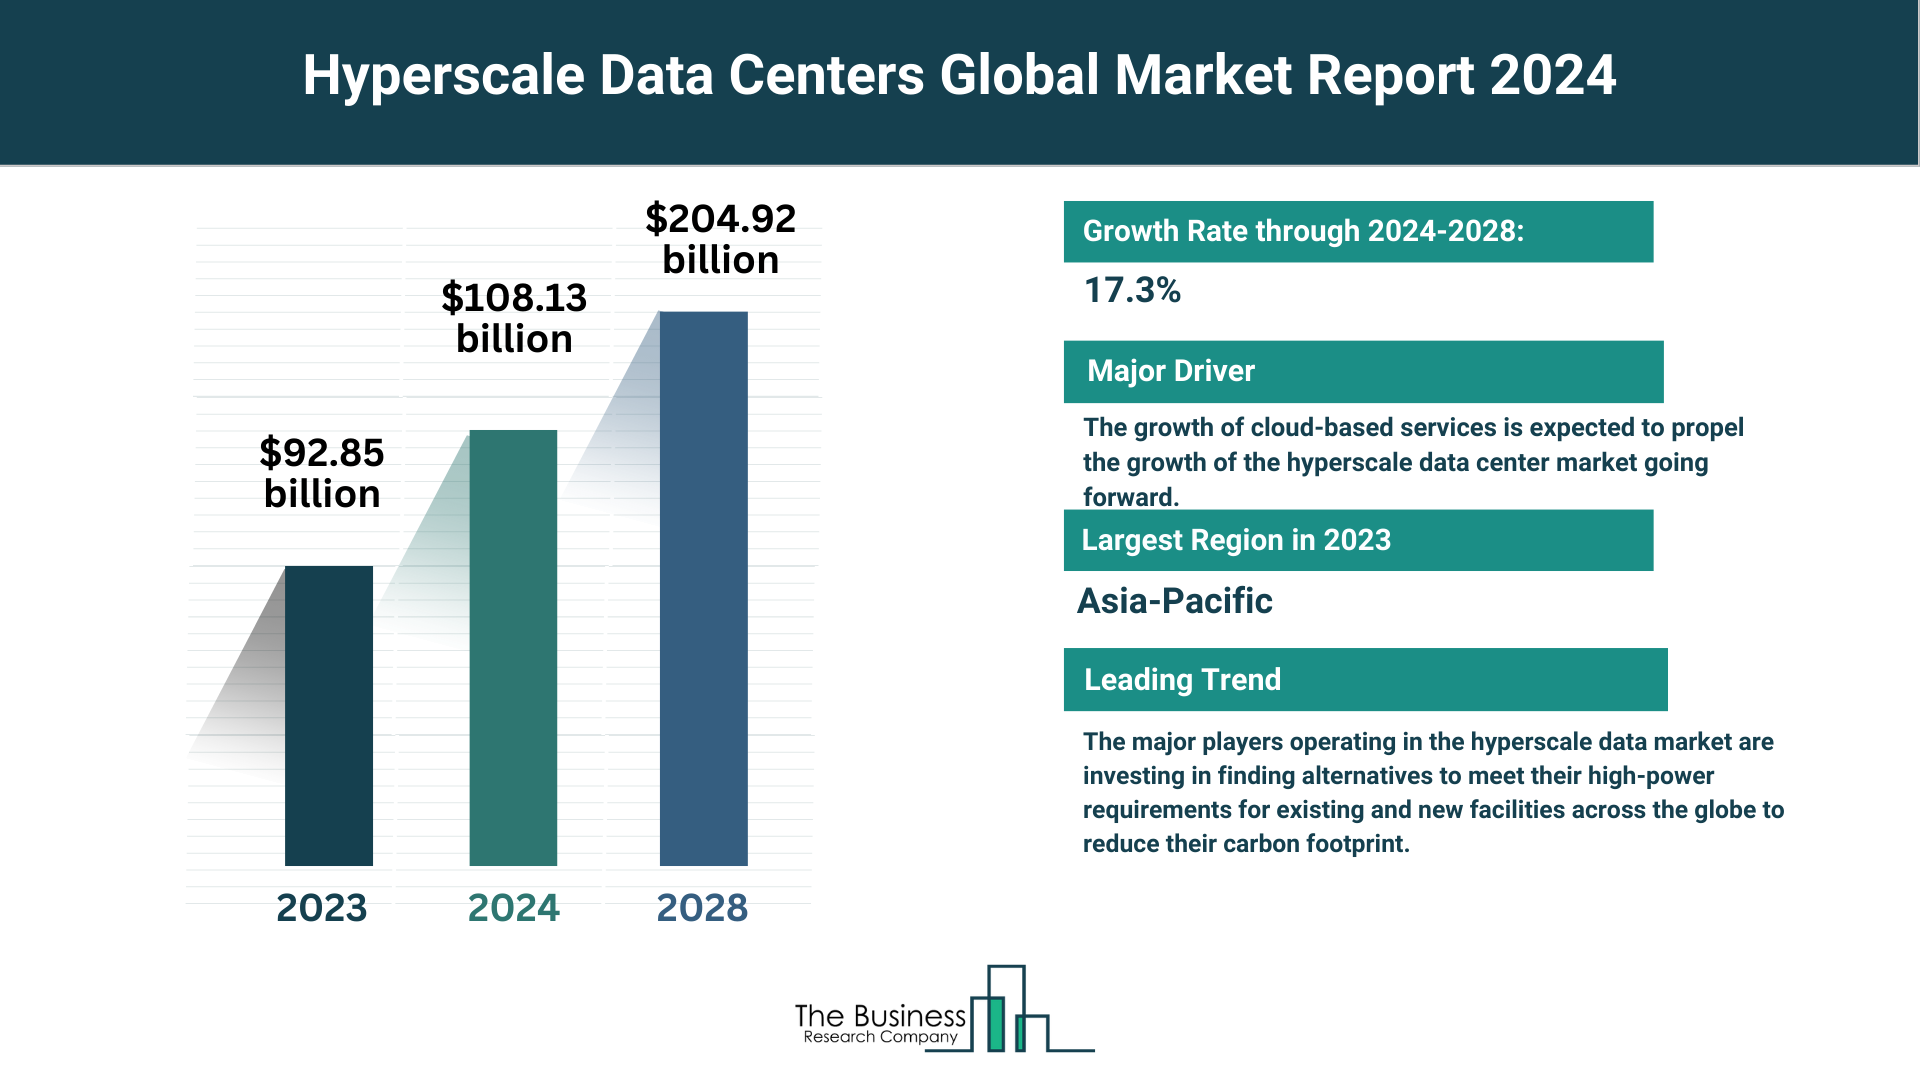 Global Hyperscale Data Centers Market